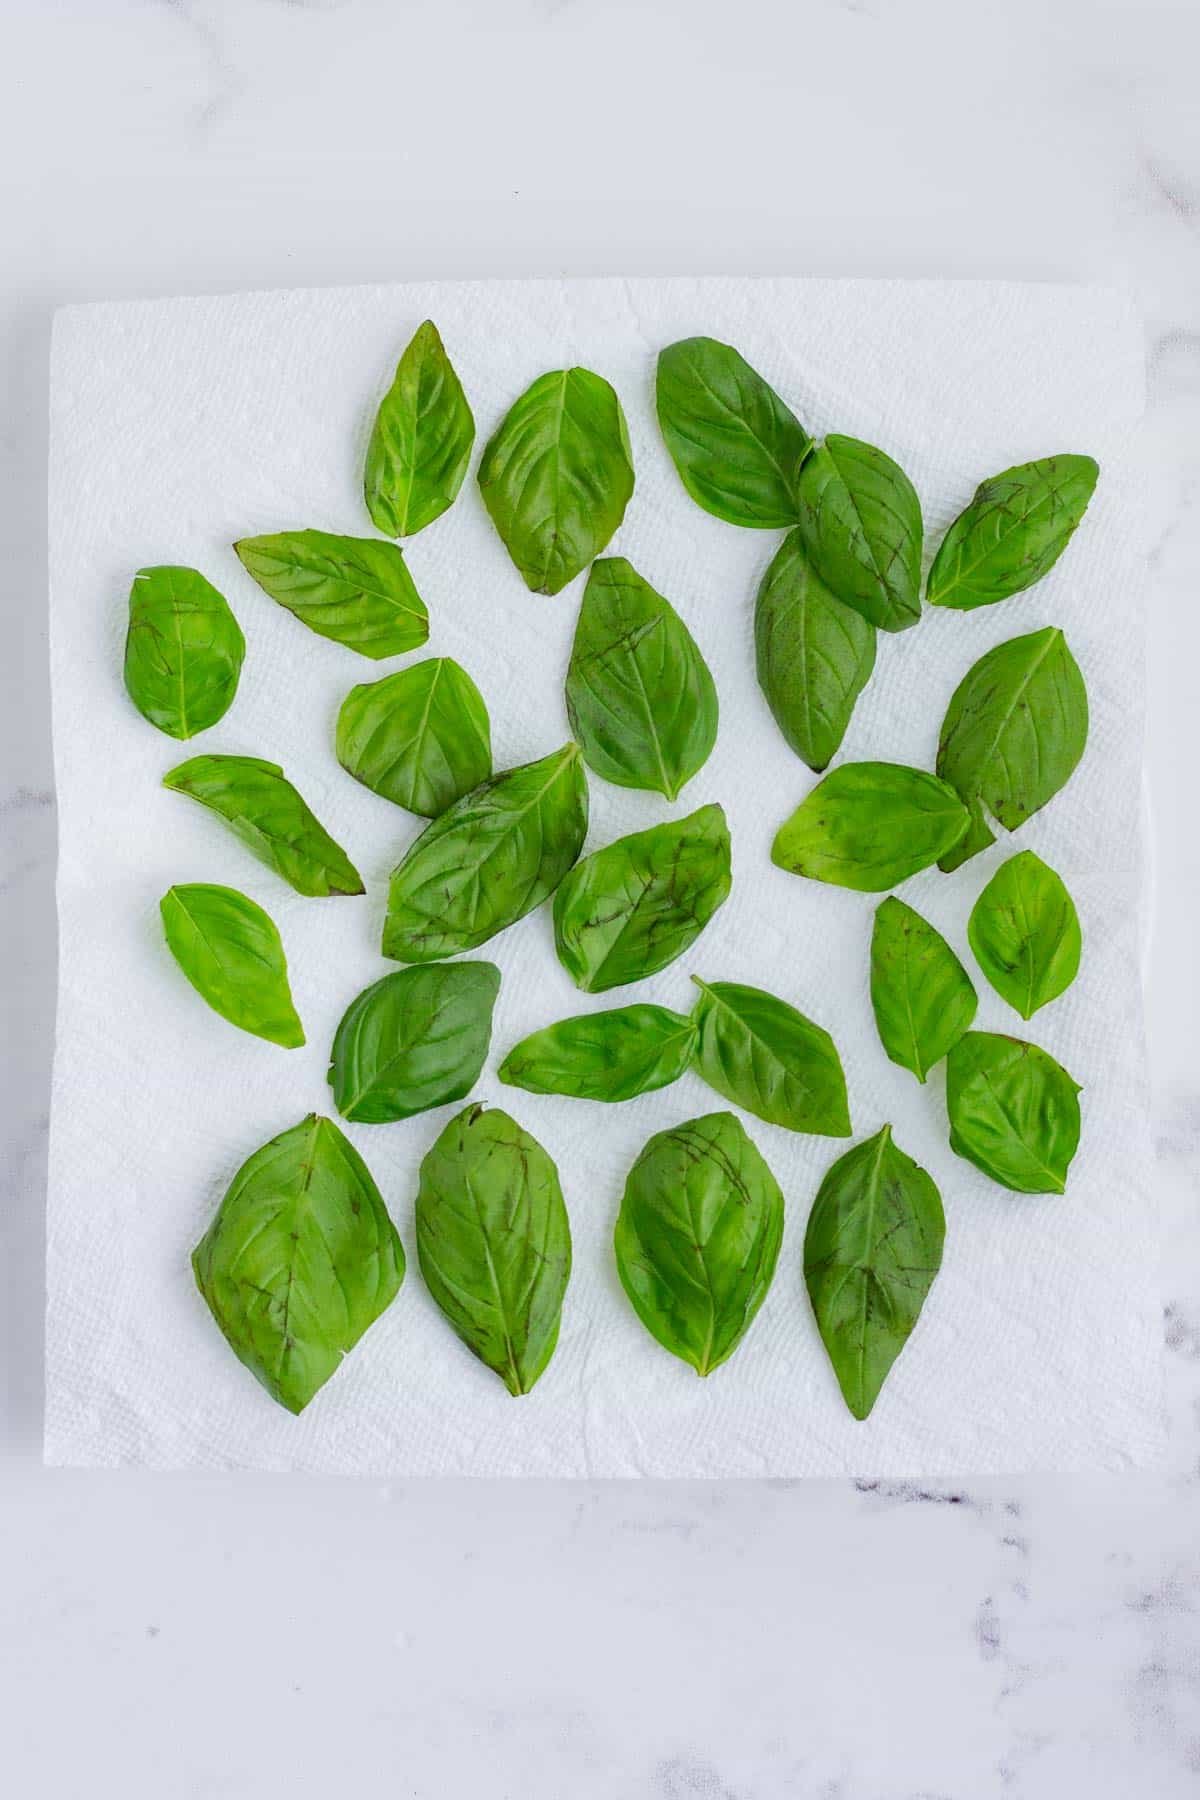 You can easily air dry basil leaves on the counter.